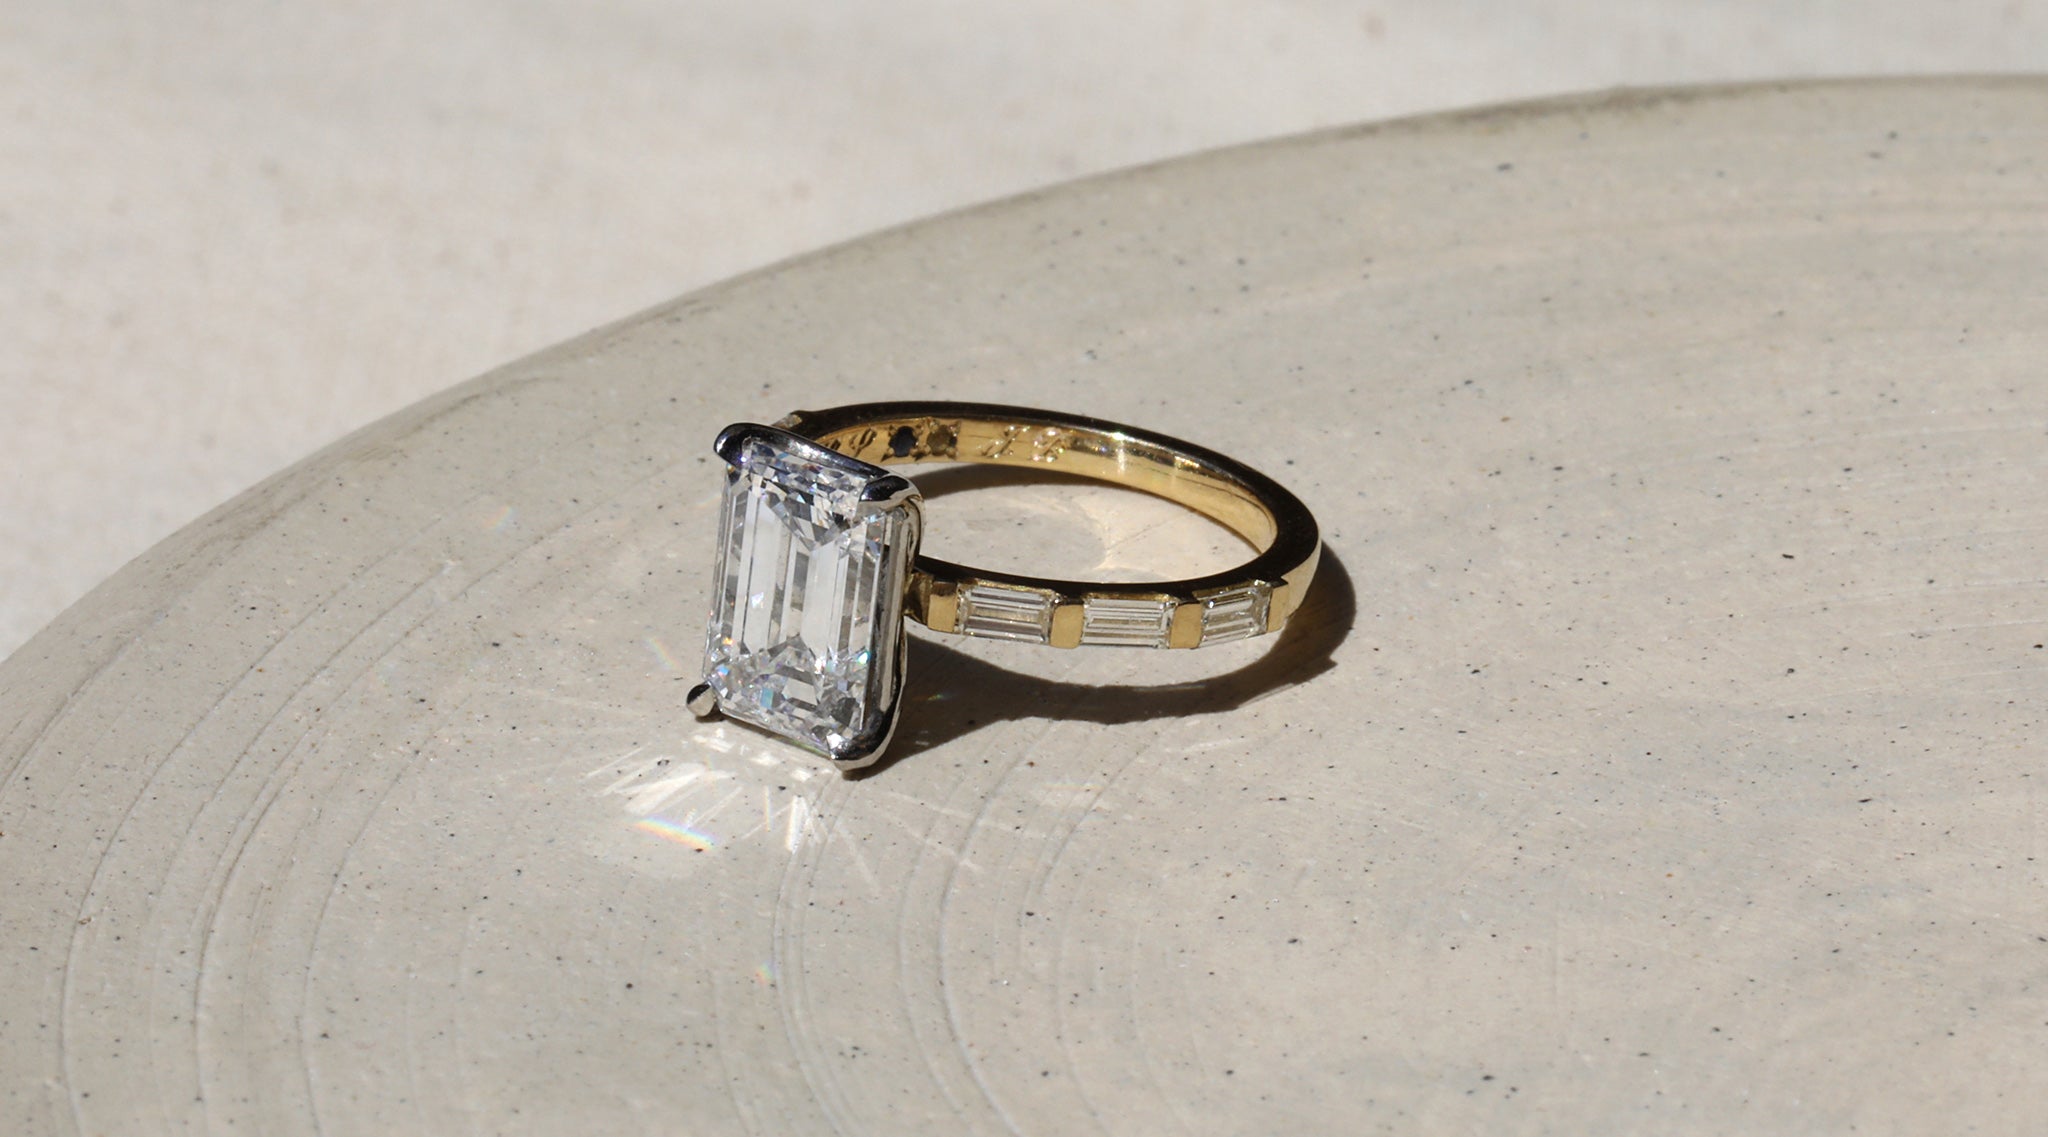 Bespoke diamond engagement ring with engraving and secret stones set inside the band.